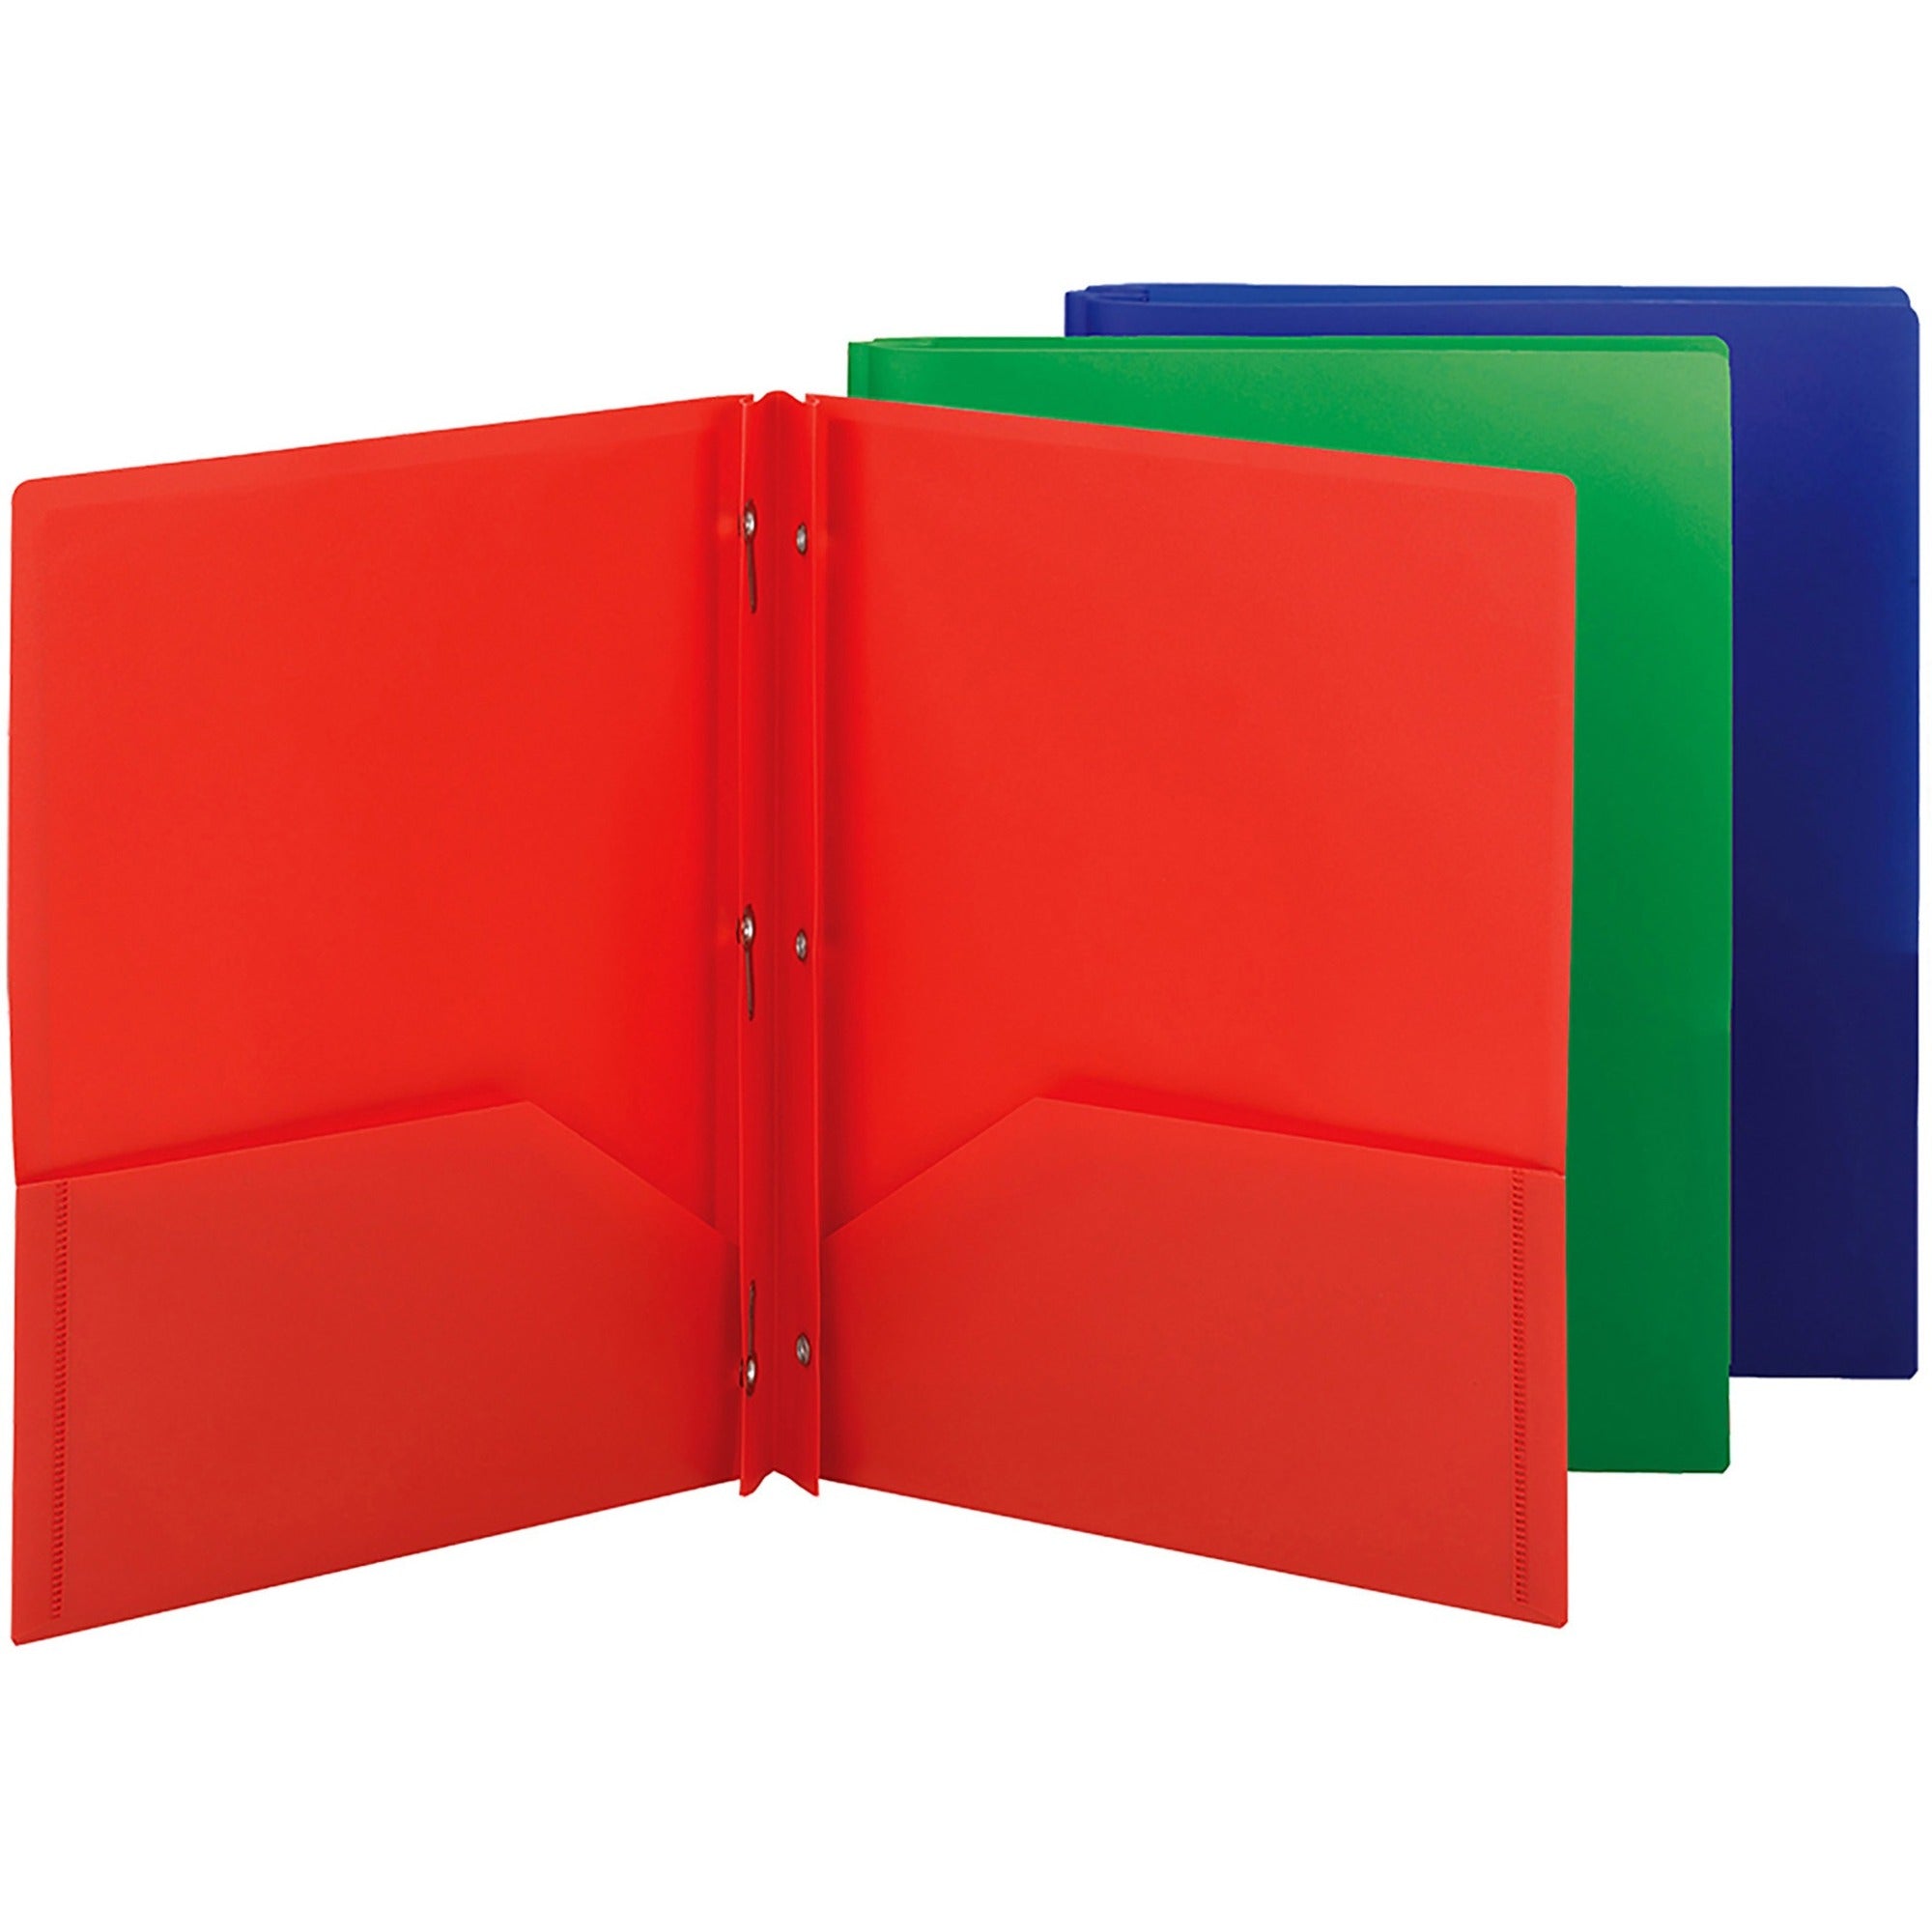 smead-letter-fastener-folder-8-1-2-x-11-180-sheet-capacity-2-x-double-tang-fasteners-2-inside-back-pockets-red-green-blue-72-carton_smd87737 - 1